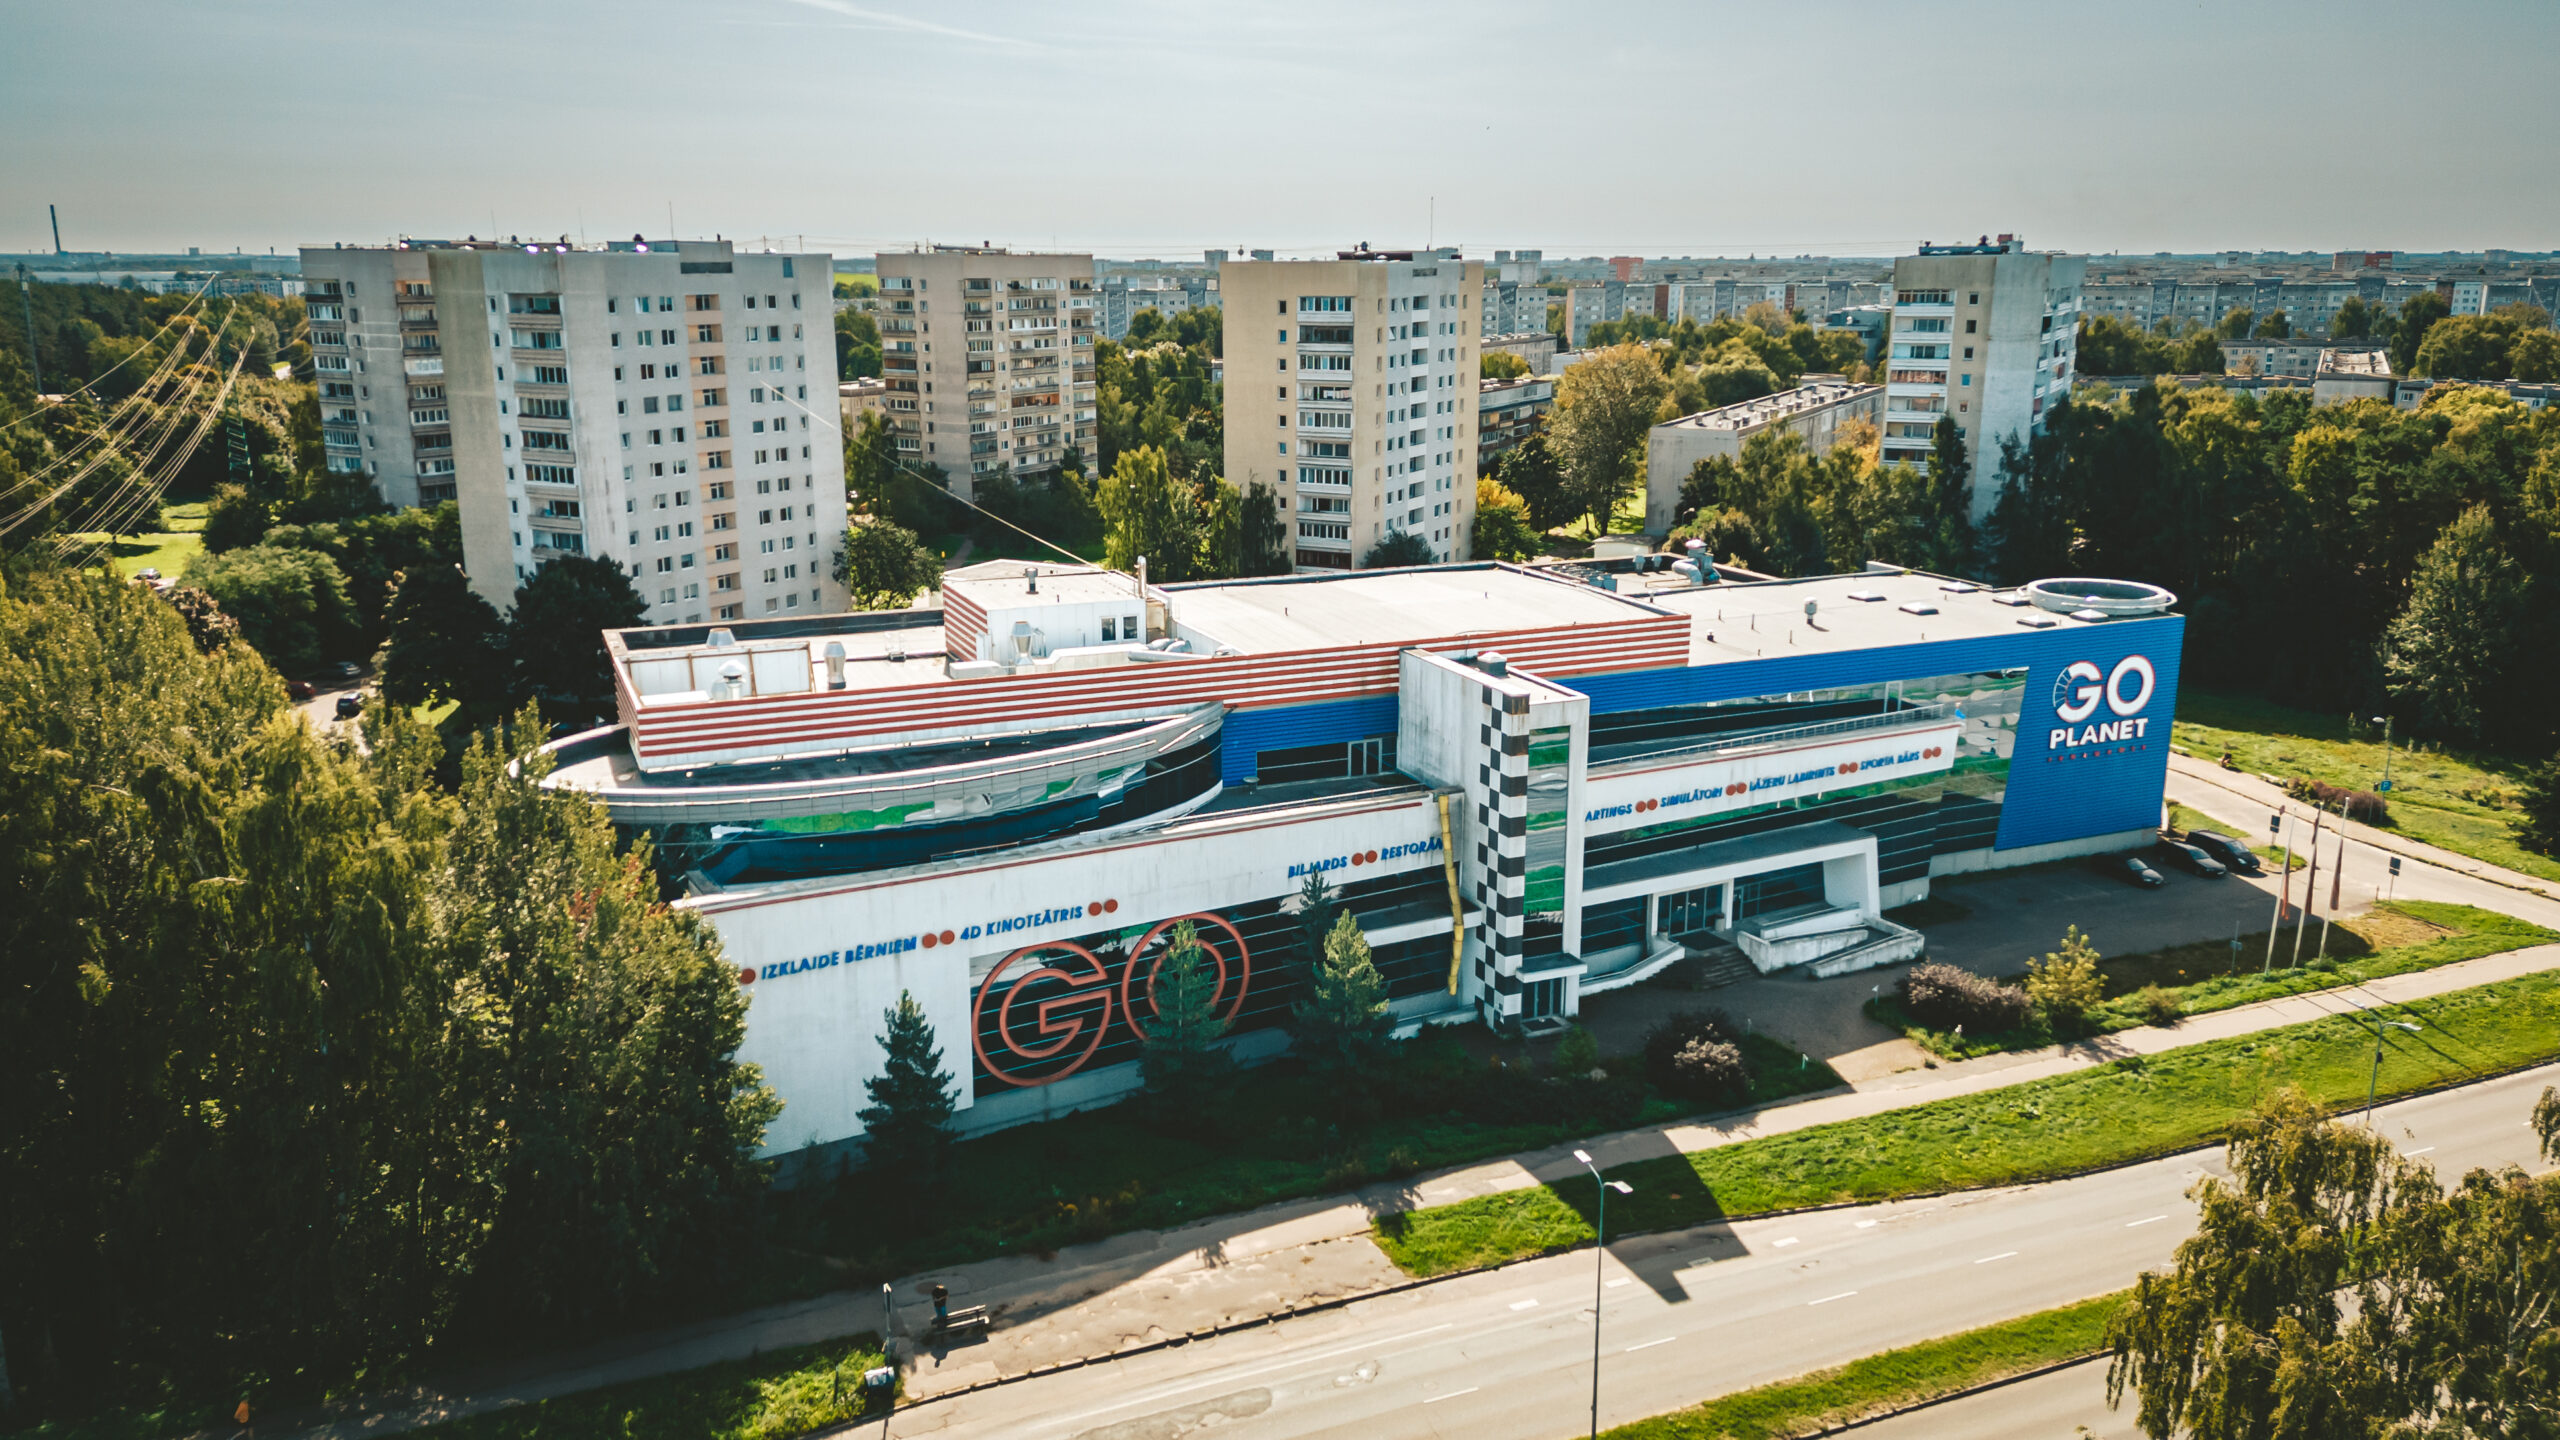 Merito Partners commits over EUR 6 million to transform ‘Go Planet’ building into one of the largest self storage facilities in Eastern Europe